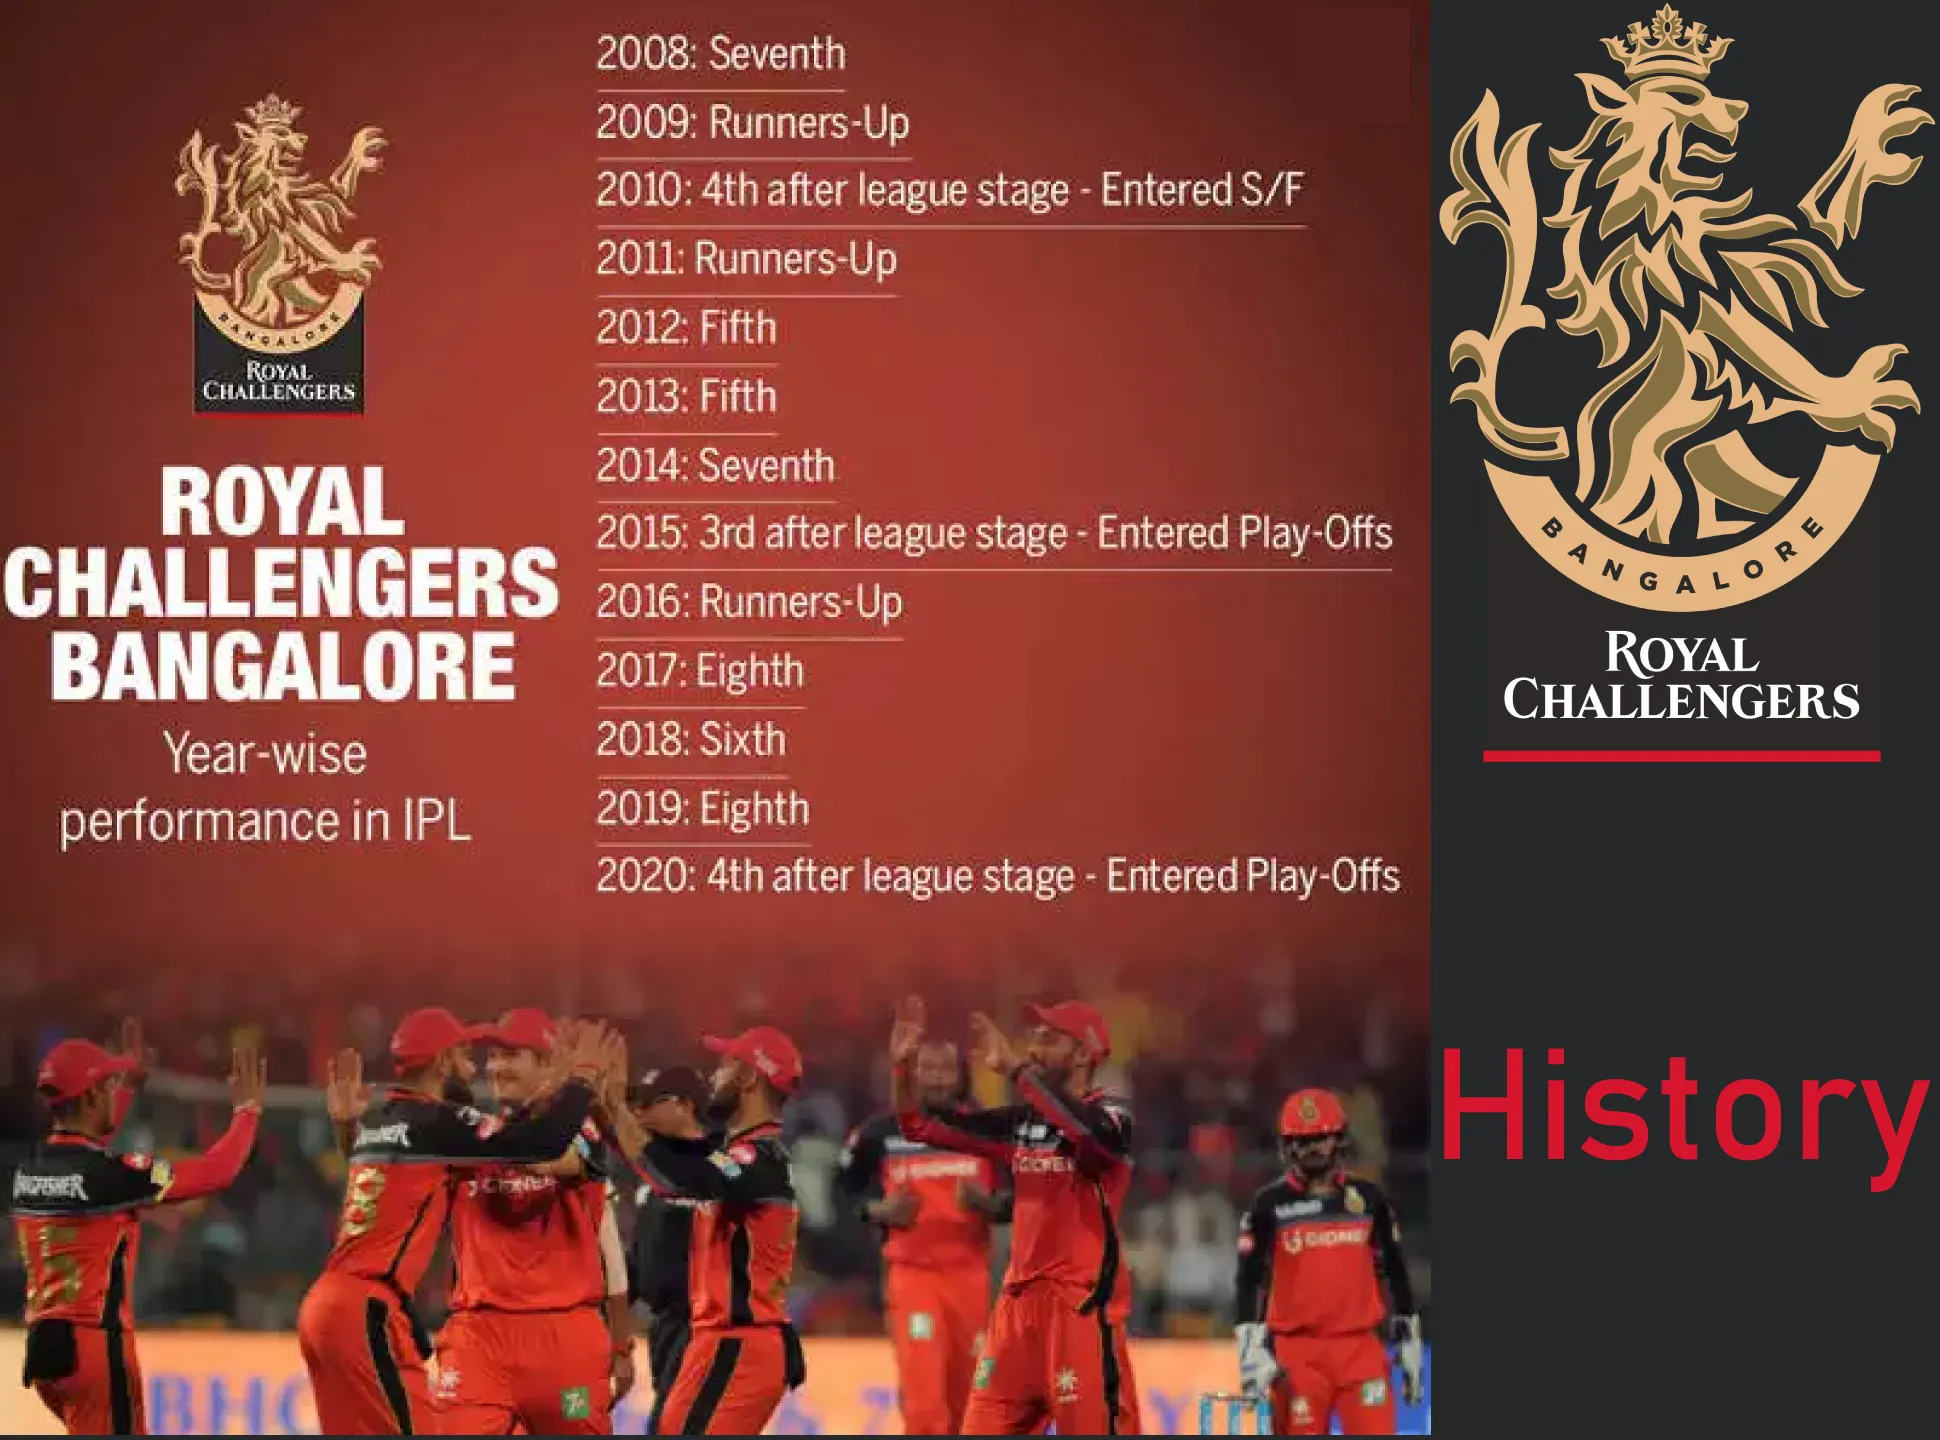 Royal Challengers Bangalore met various ups and downs on its way.